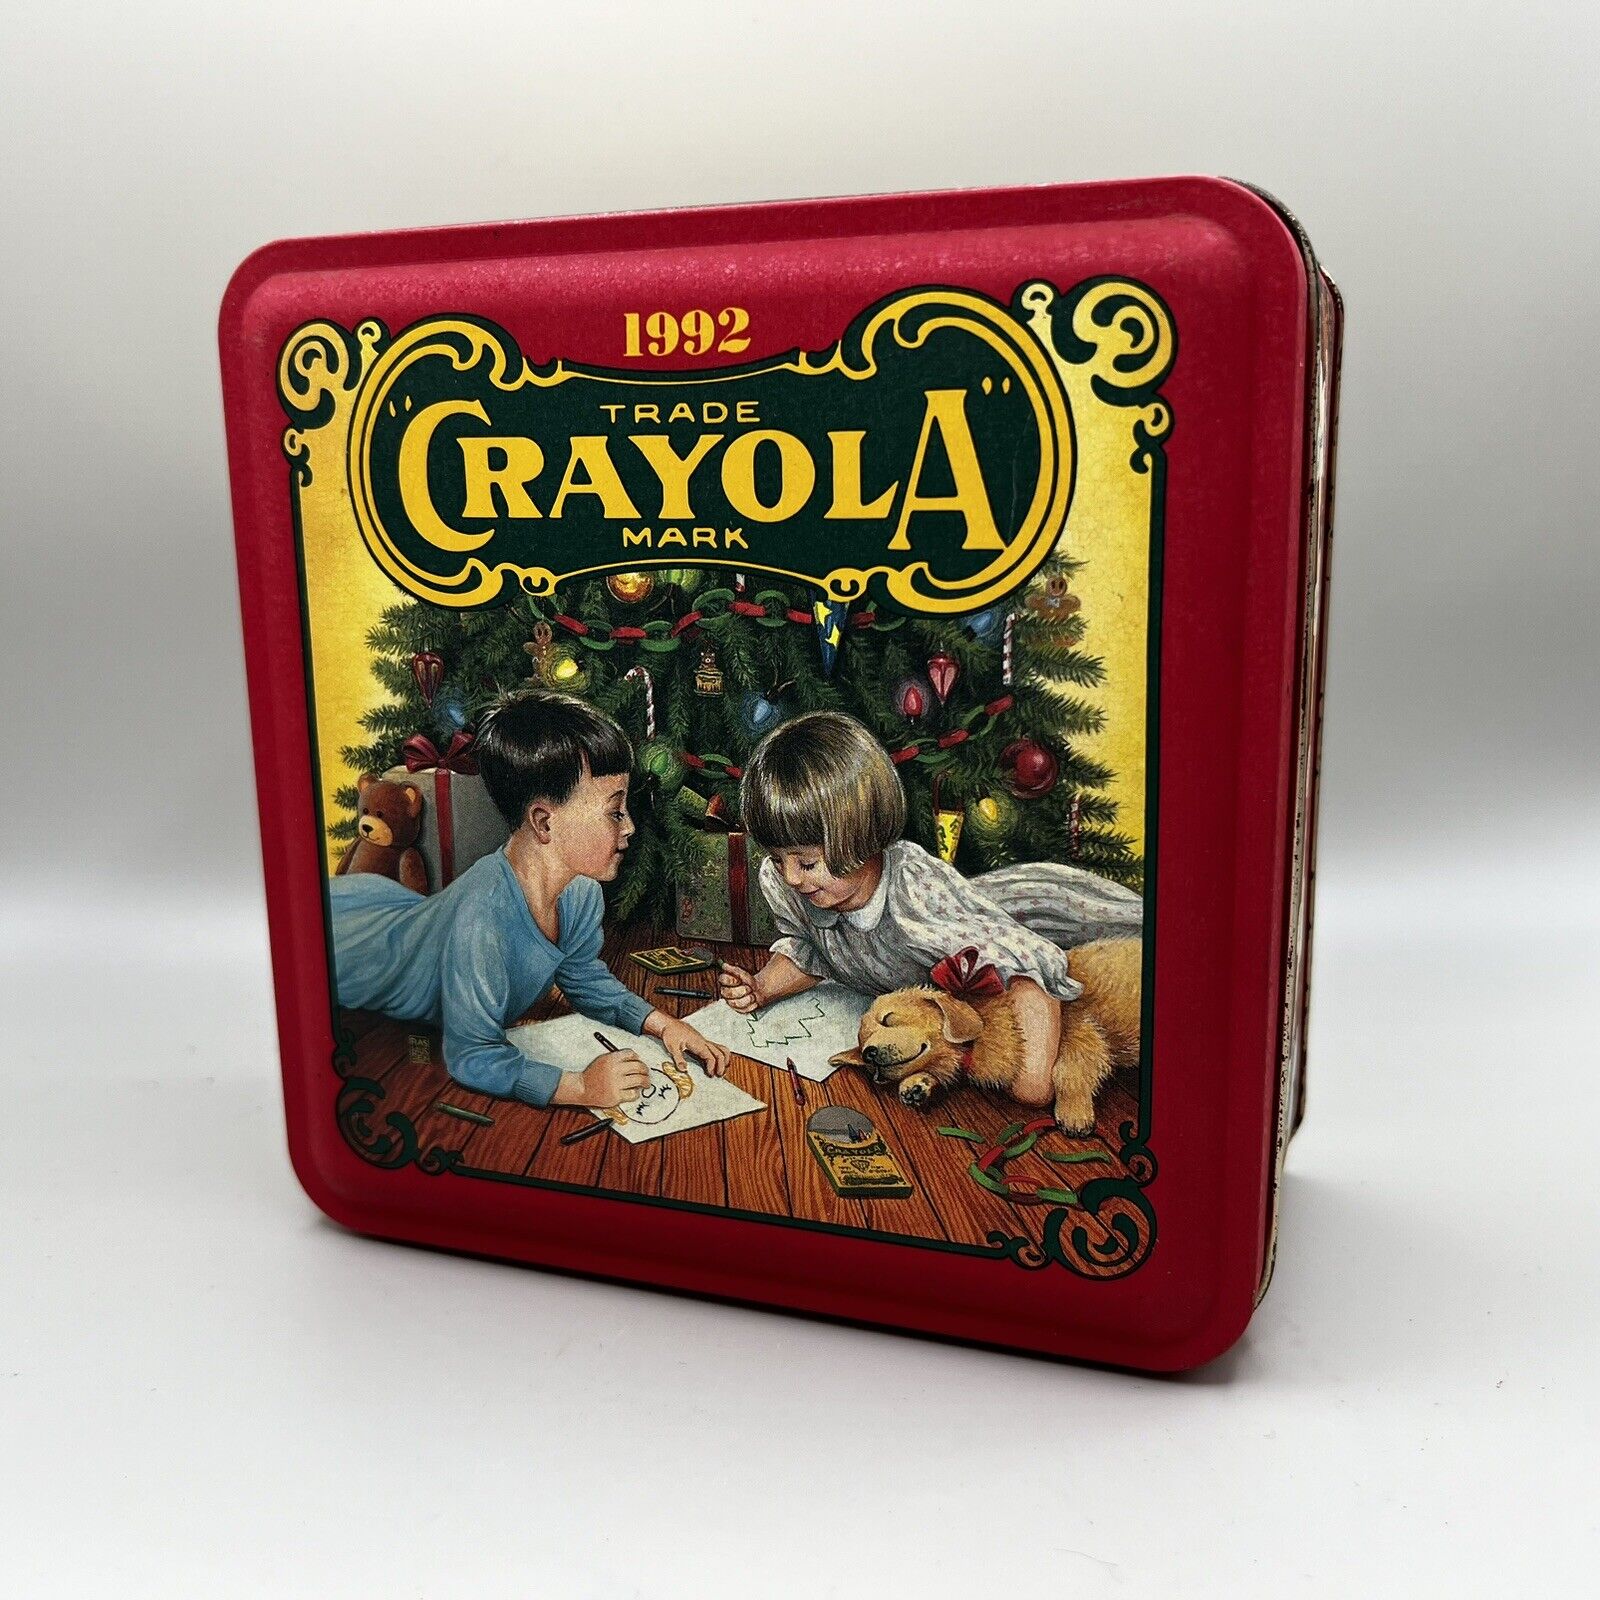 Vintage 1992 Crayola Tin Container Holiday Christmas Design